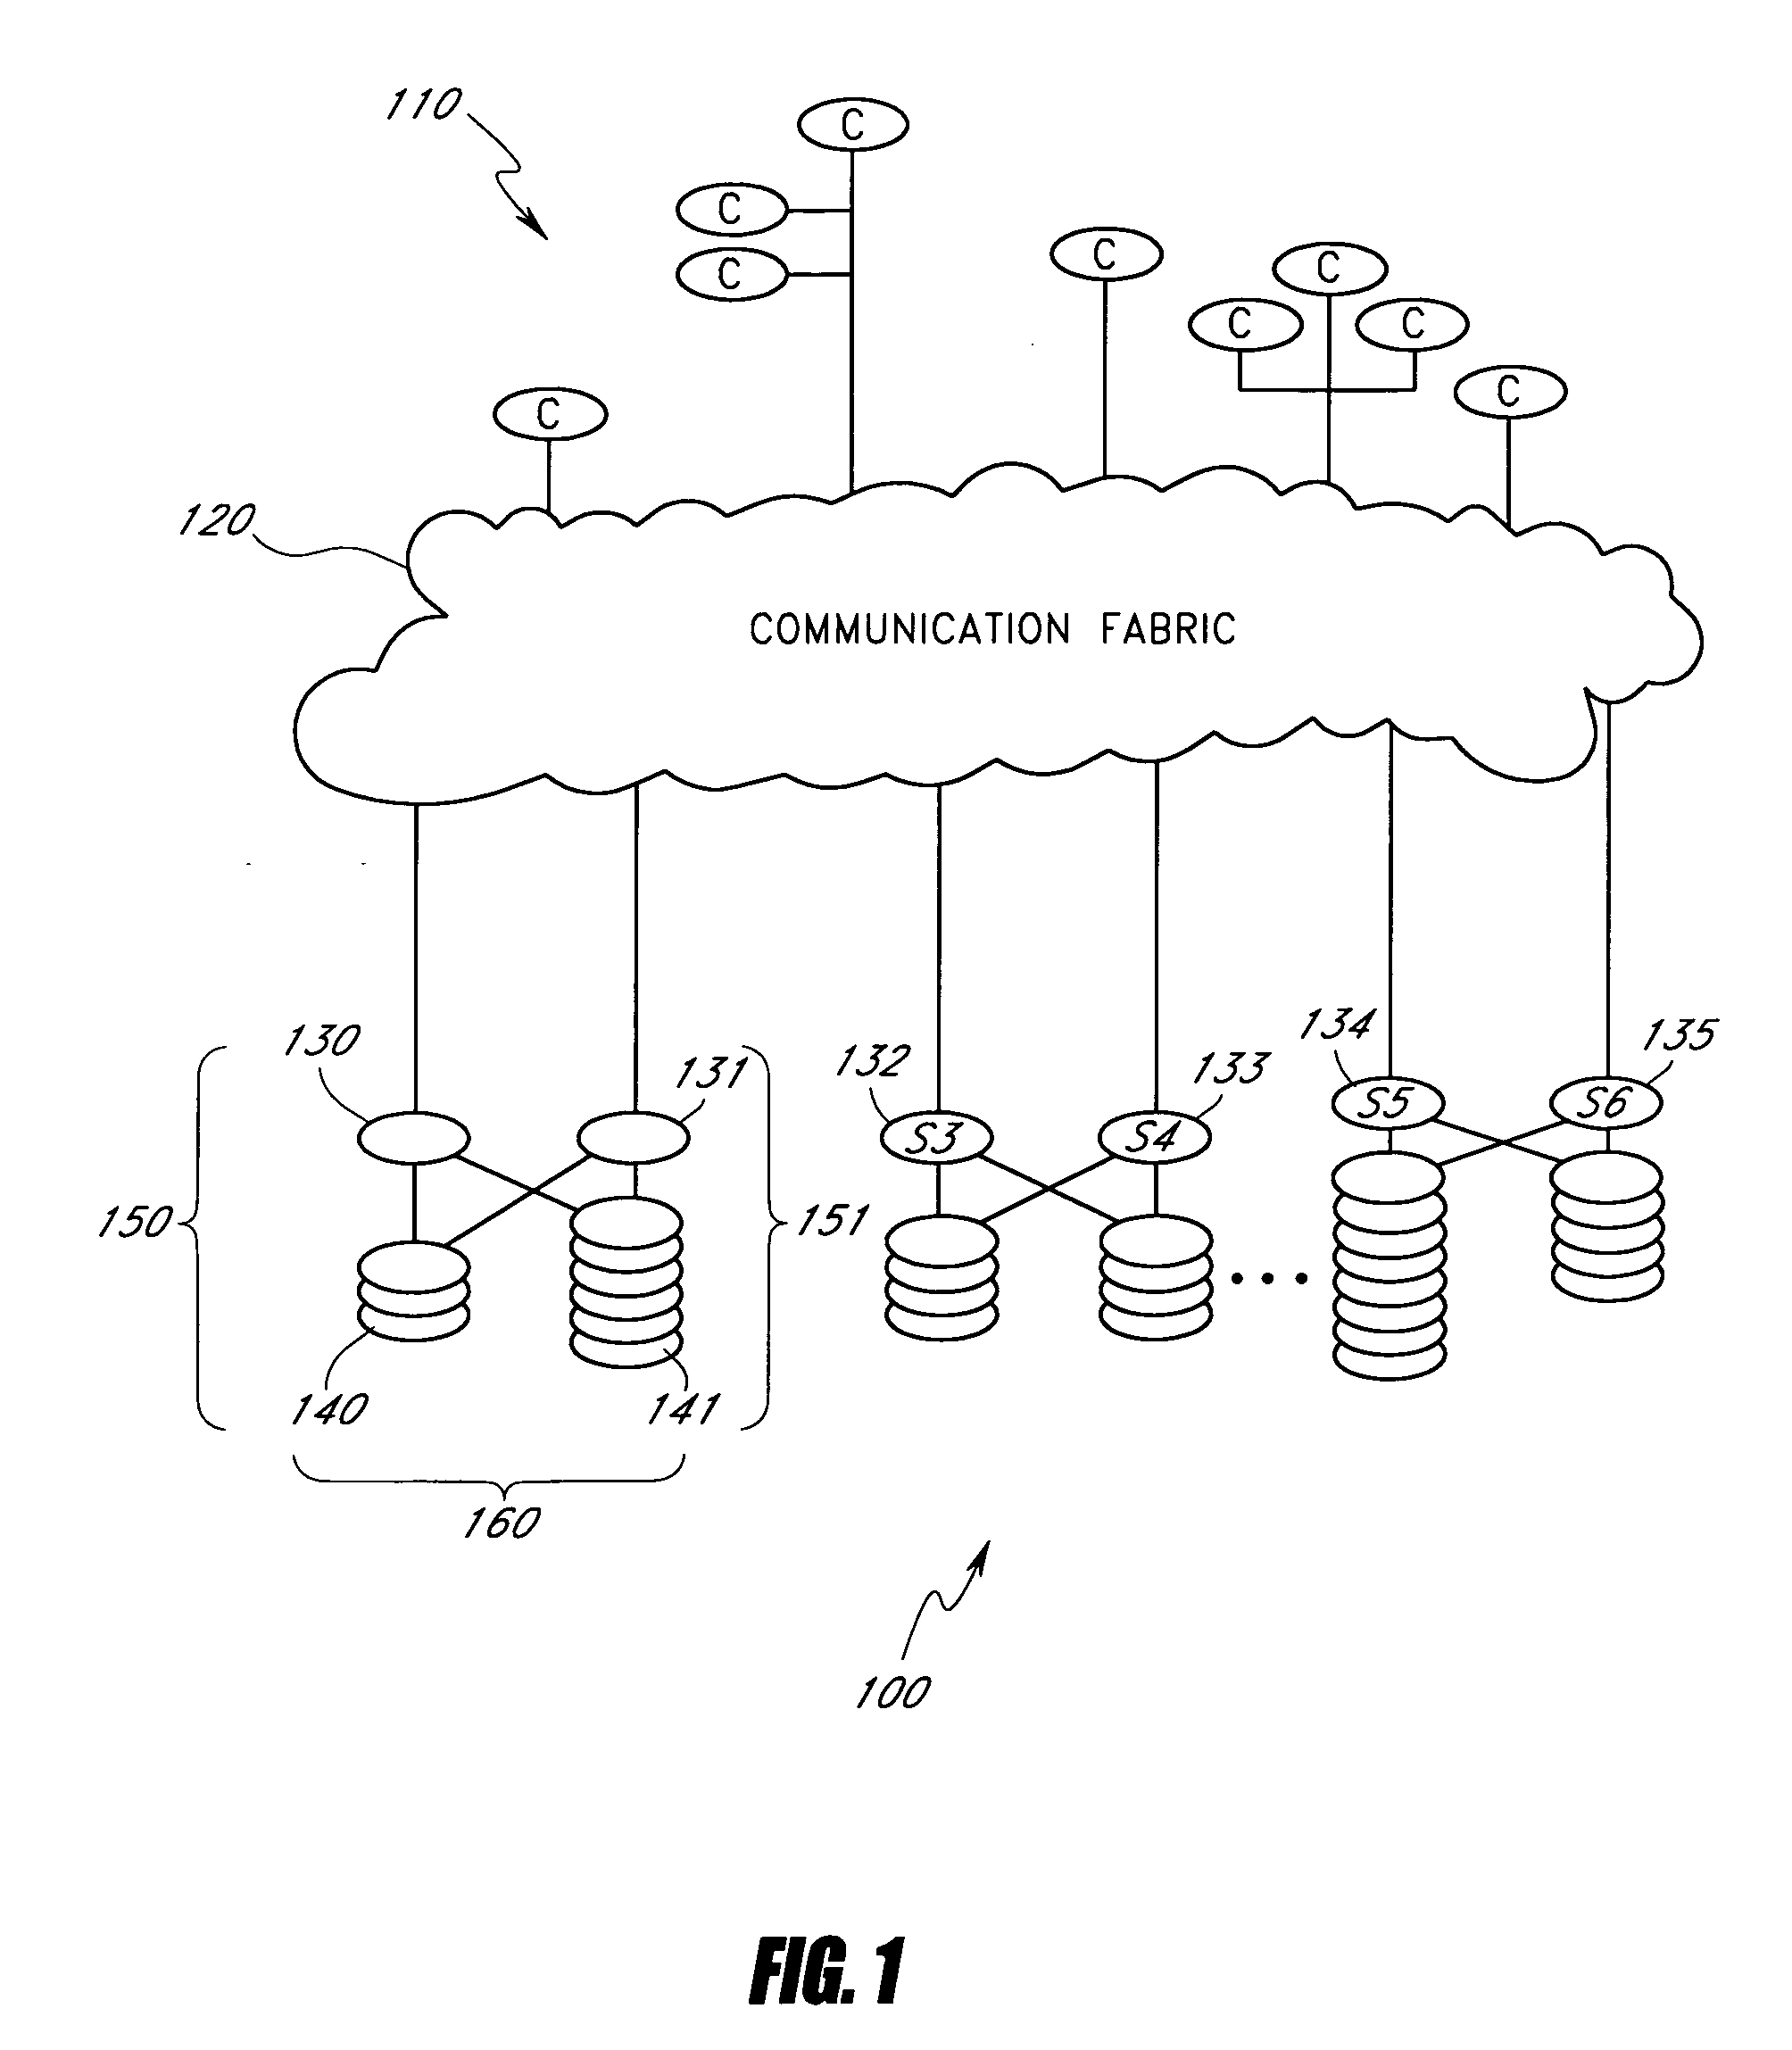 Fault-tolerant computer network file systems and methods